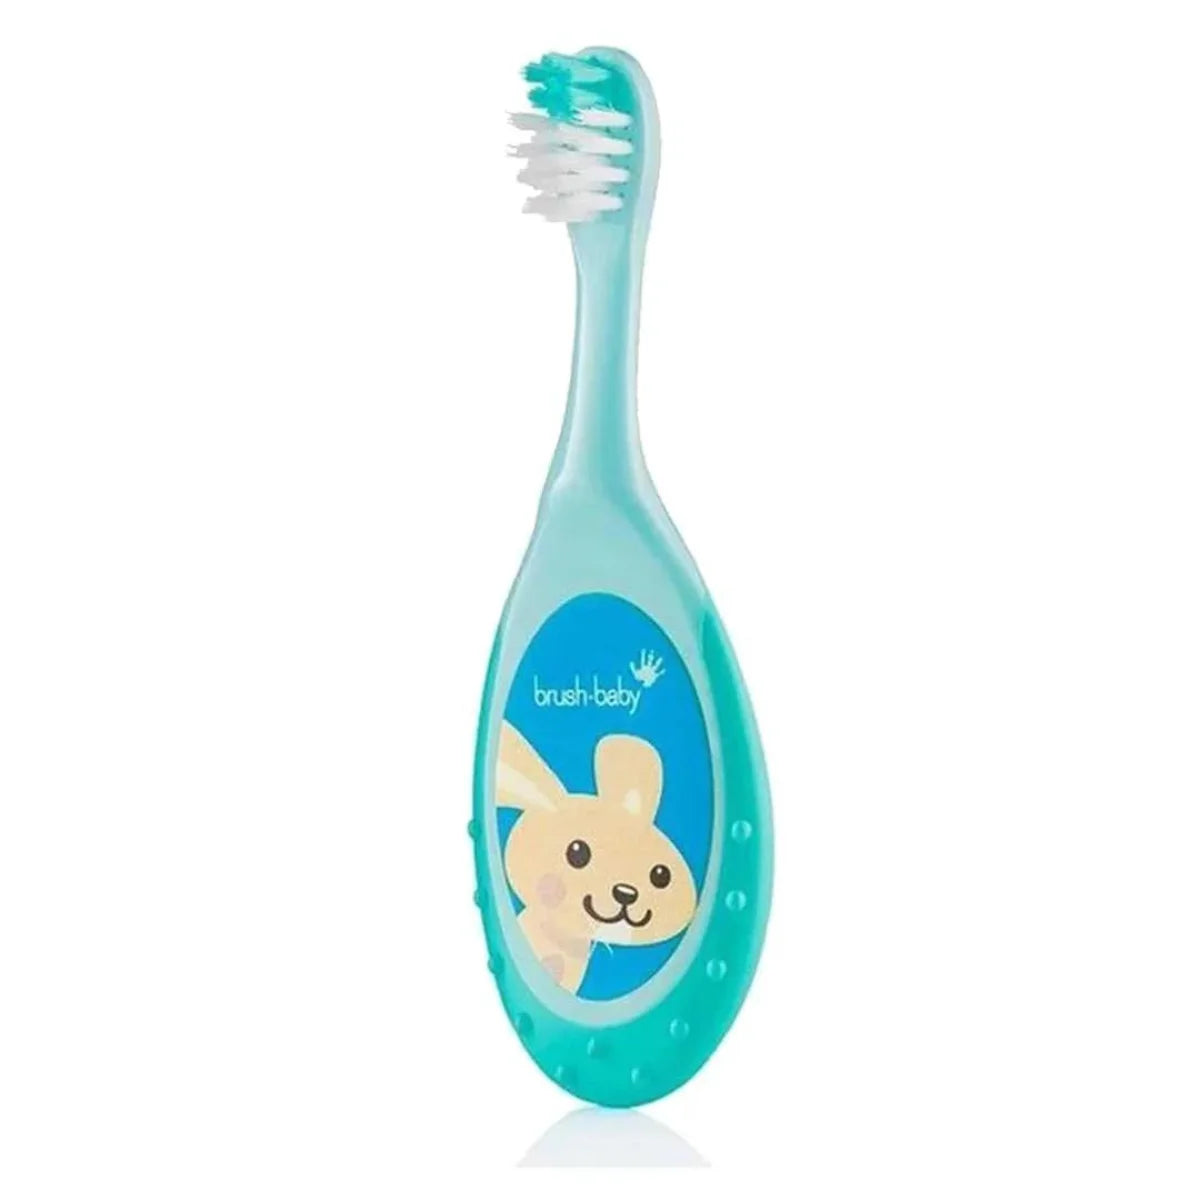 teal flossbrush toothbrush for toddlers